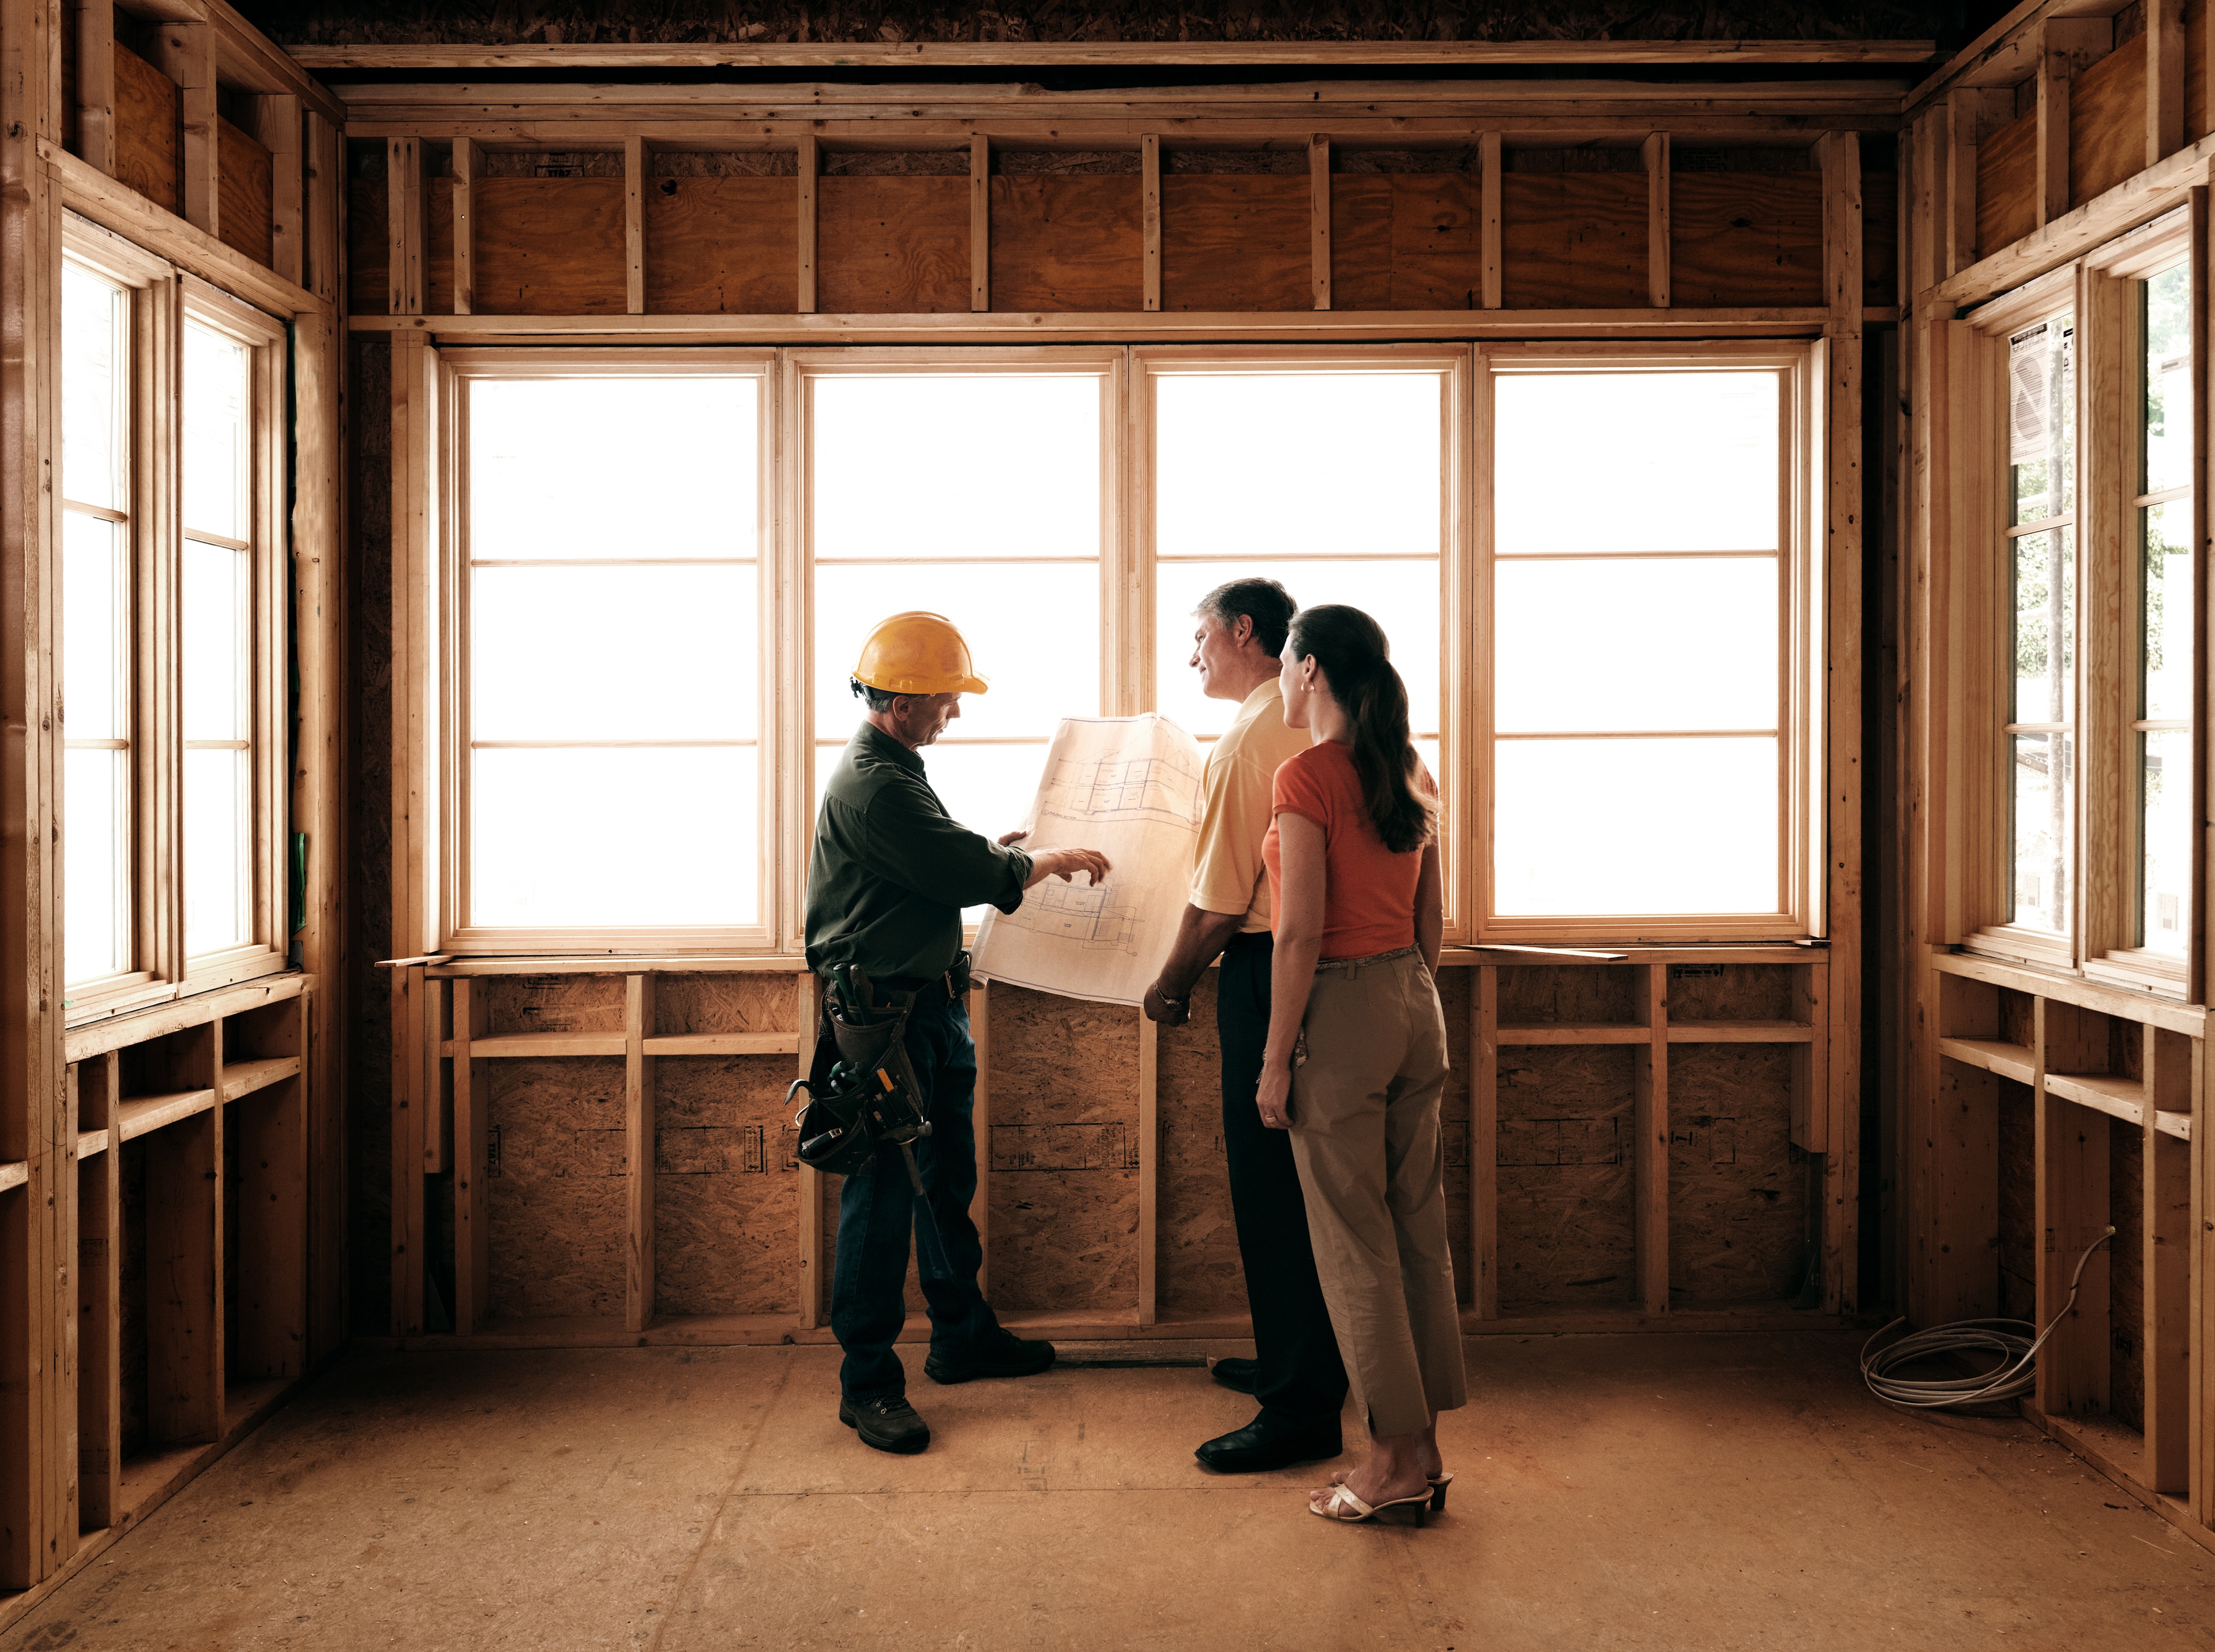 A contractor walks homeowners through plans for an addition.